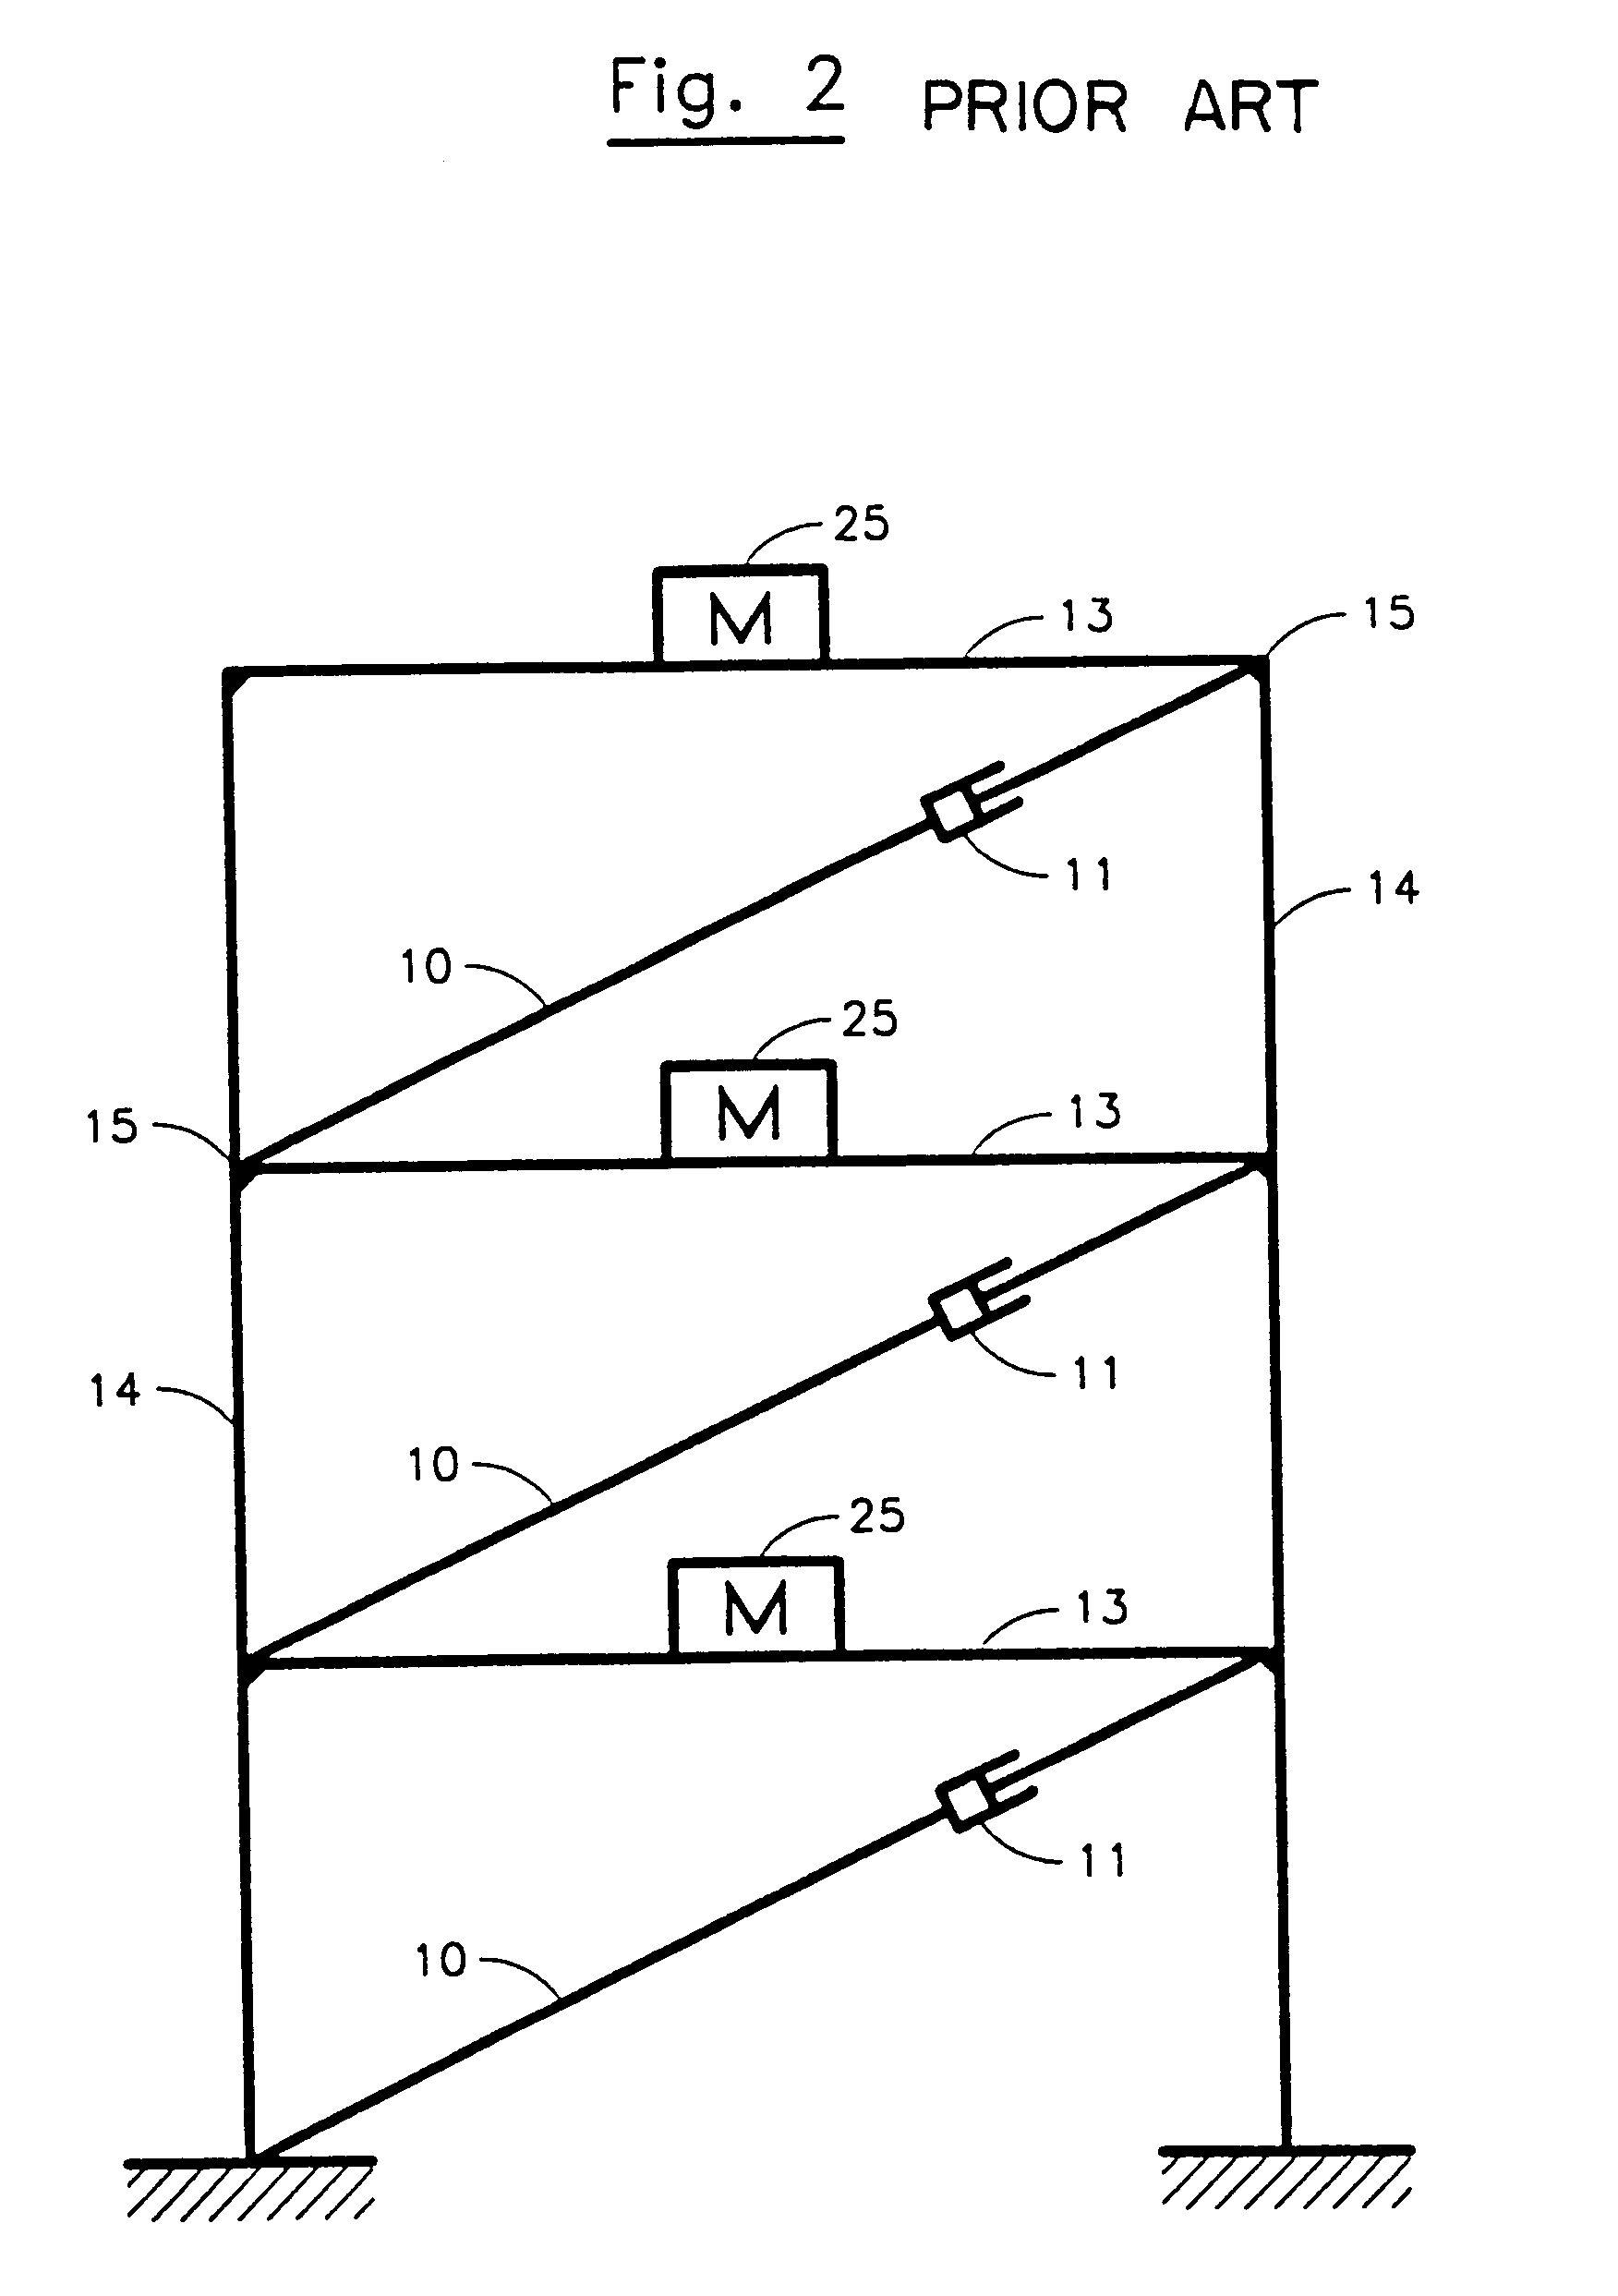 Method and apparatus to control seismic forces, accelerations, and displacements of structures